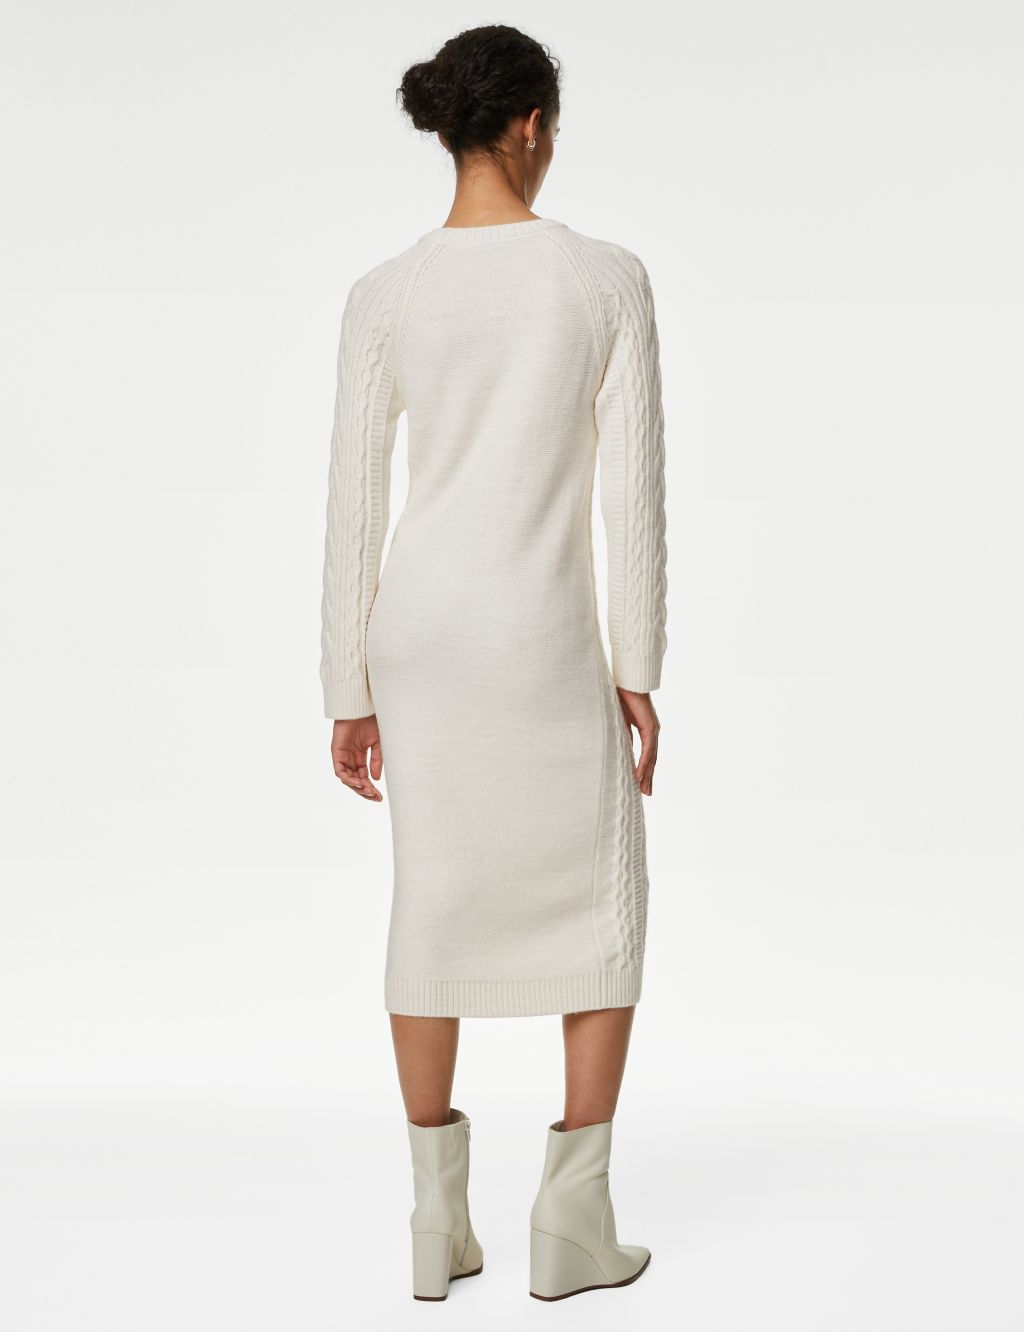 Cable Knit Crew Neck Midi Knitted Dress image 5